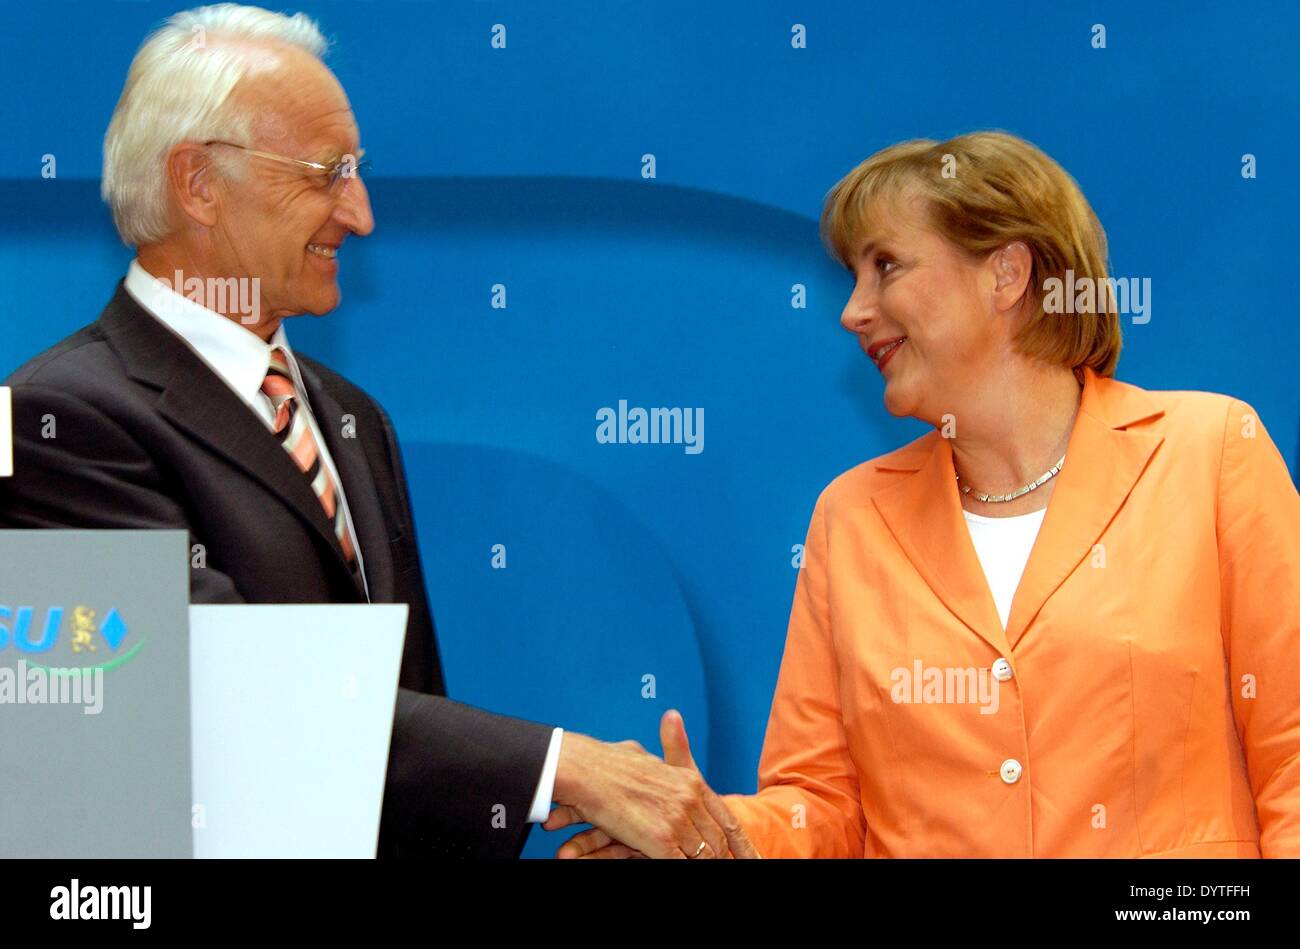 Angela Merkel and Edmund Stoiber at the announcement of Merkel as chancellor candidate of the Union, 2005 Stock Photo